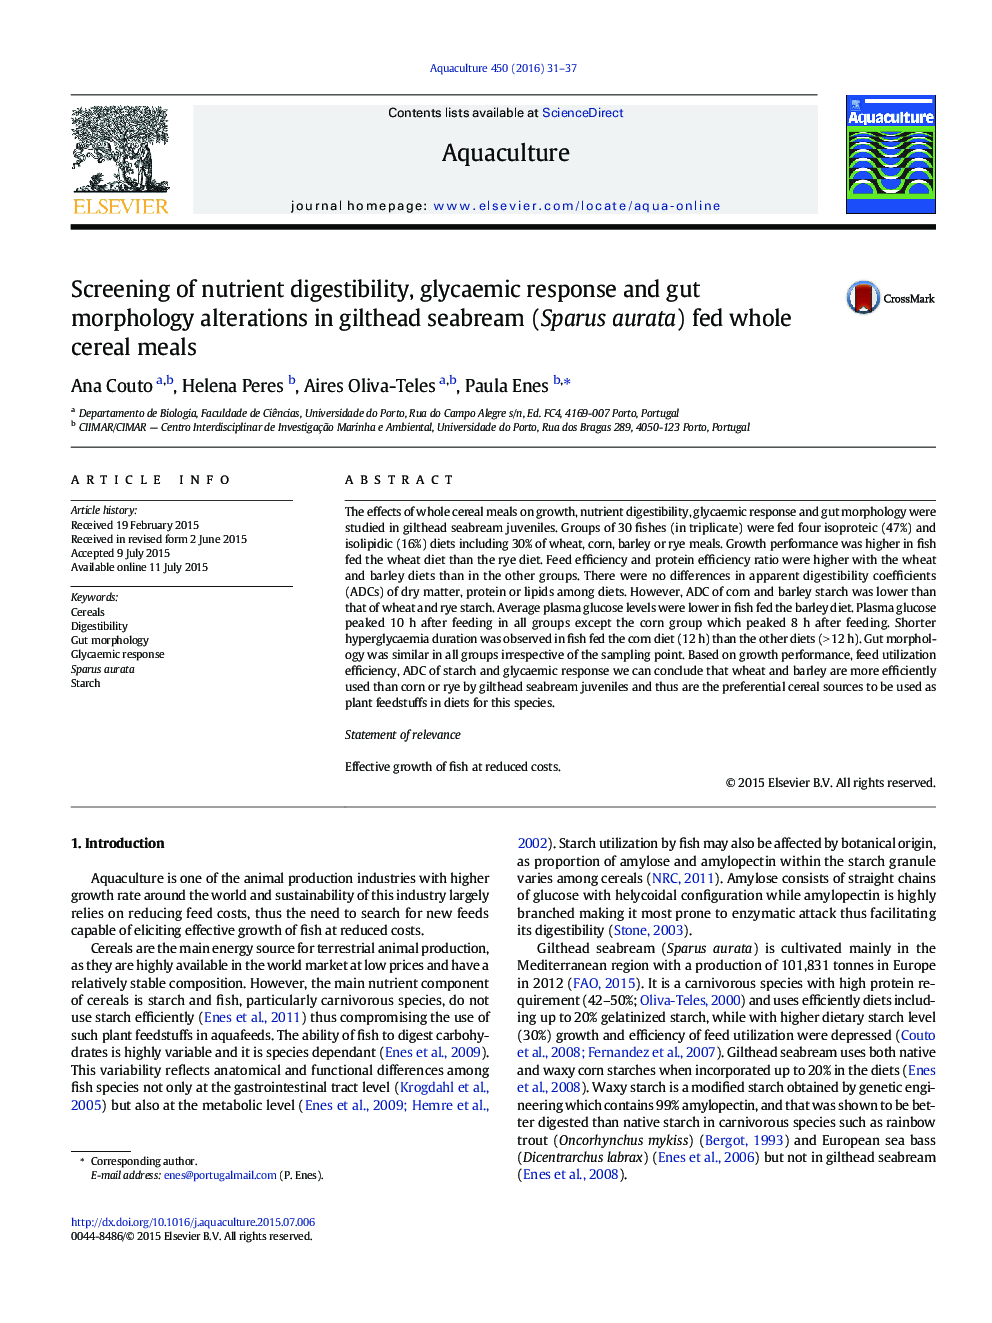 Screening of nutrient digestibility, glycaemic response and gut morphology alterations in gilthead seabream (Sparus aurata) fed whole cereal meals